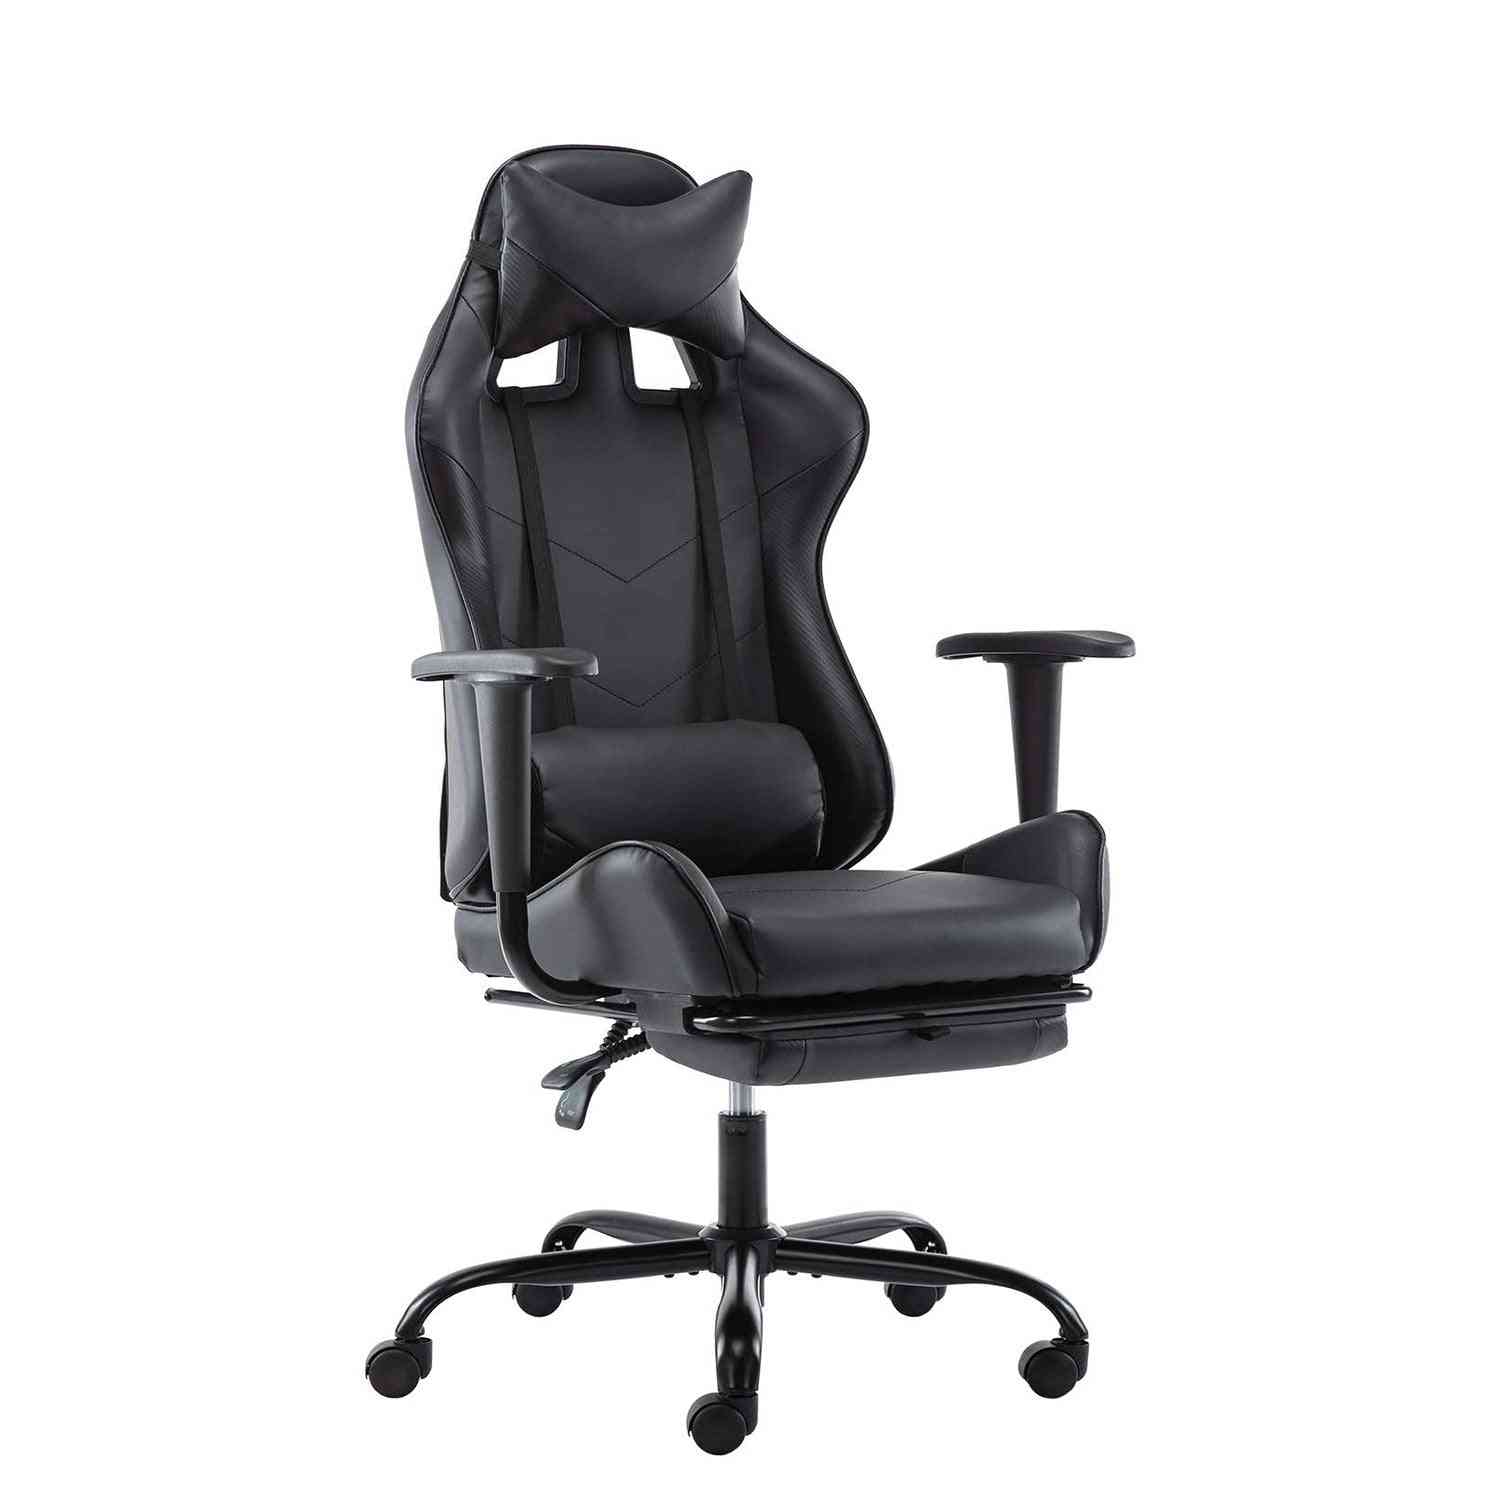 Gaming Chair With Footrest Ergonomic Office High Back Computer